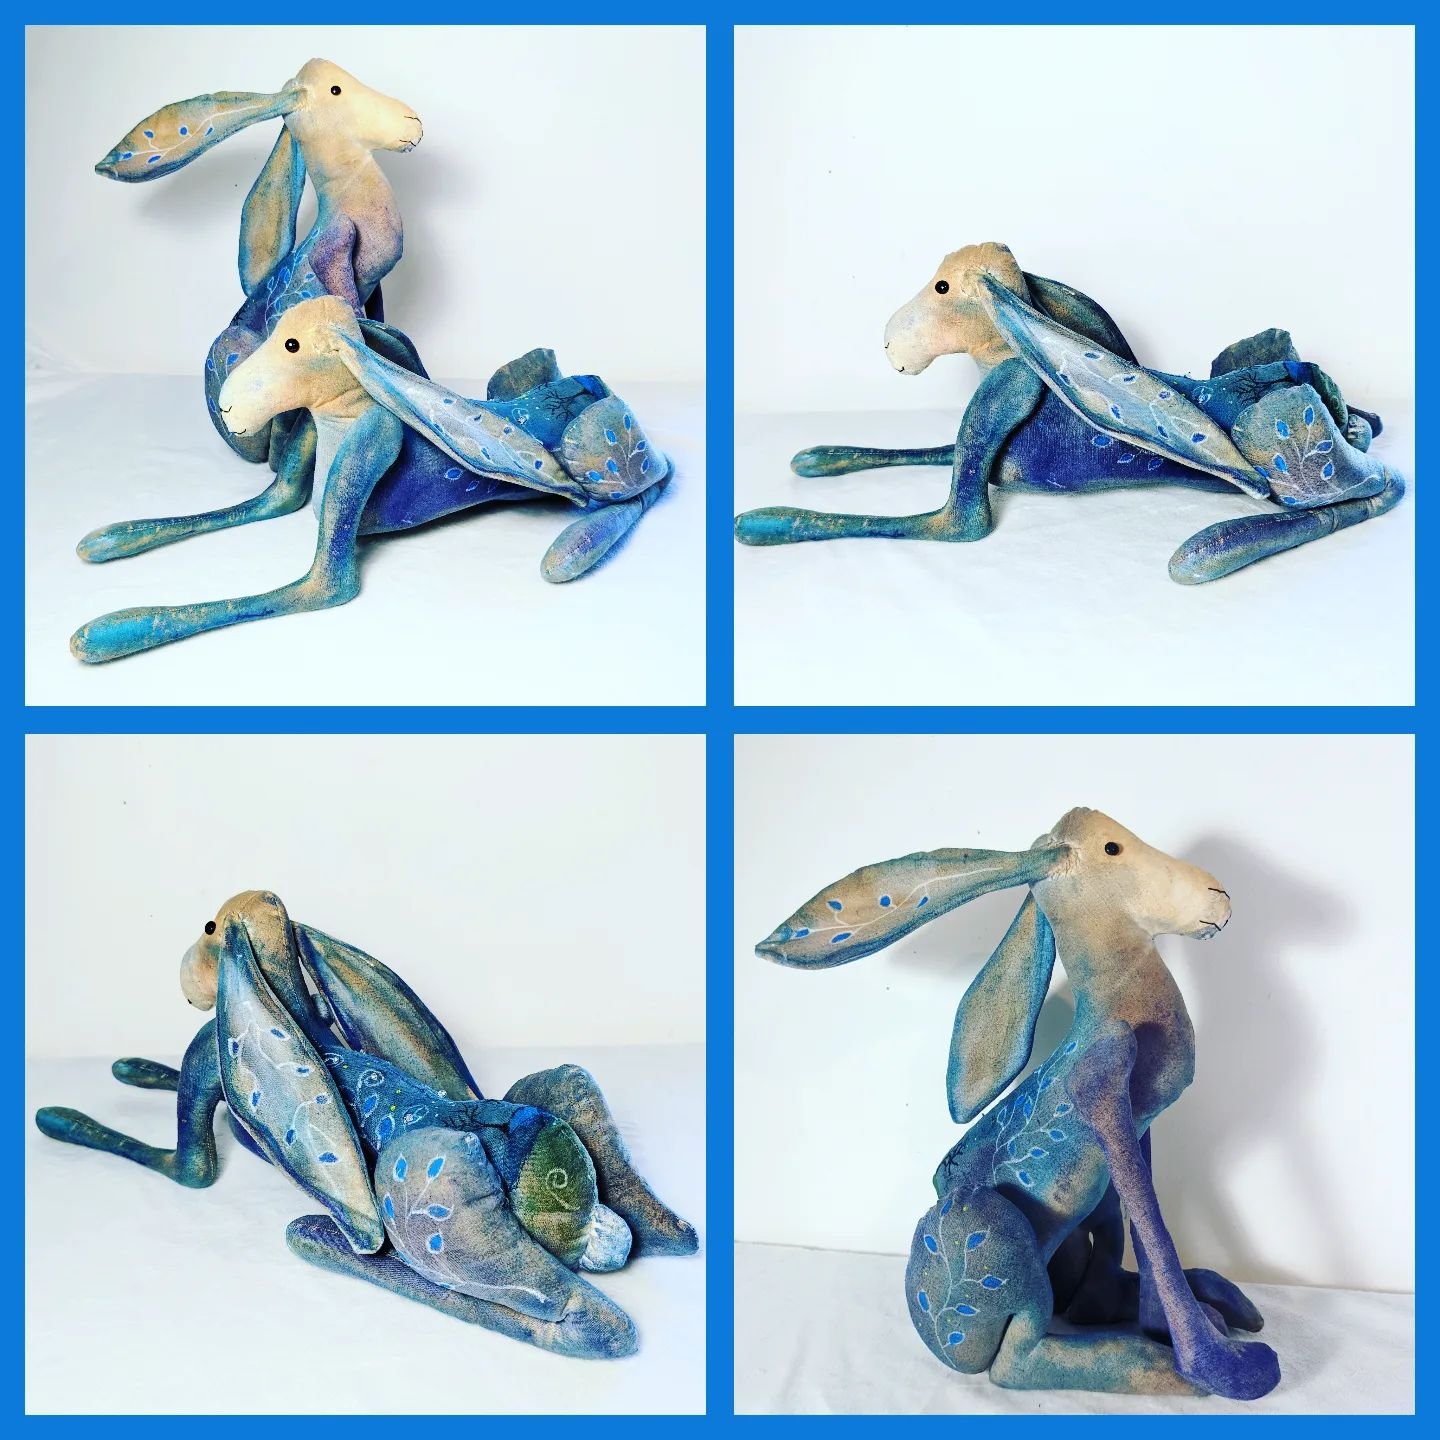 Different views of textile hare sculptures